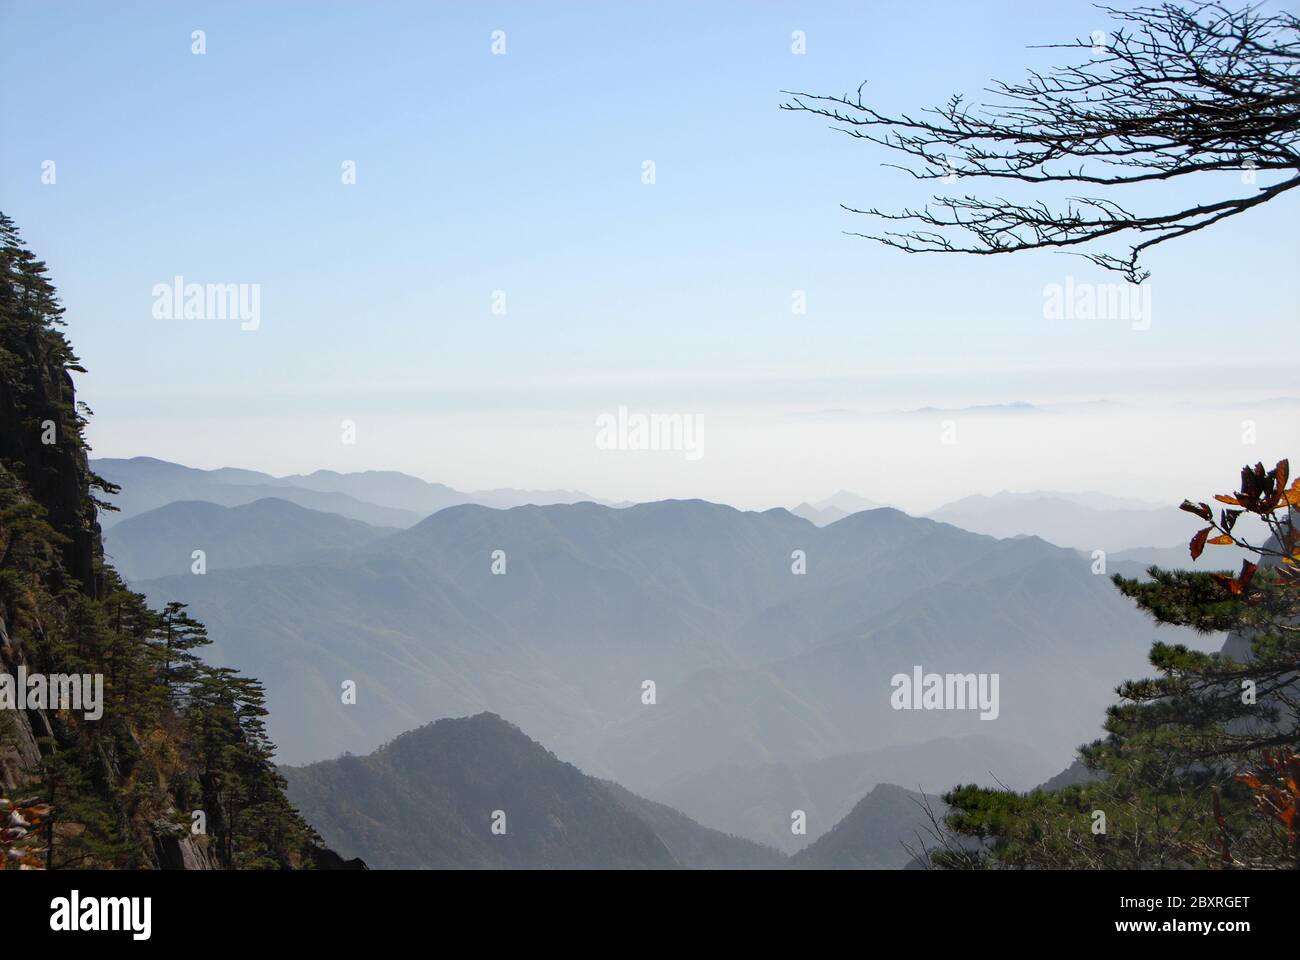 Huangshan Mountain in Anhui Province, China. A beautiful panoramic view of a valley on Huangshan looking out over distant mountains Stock Photo